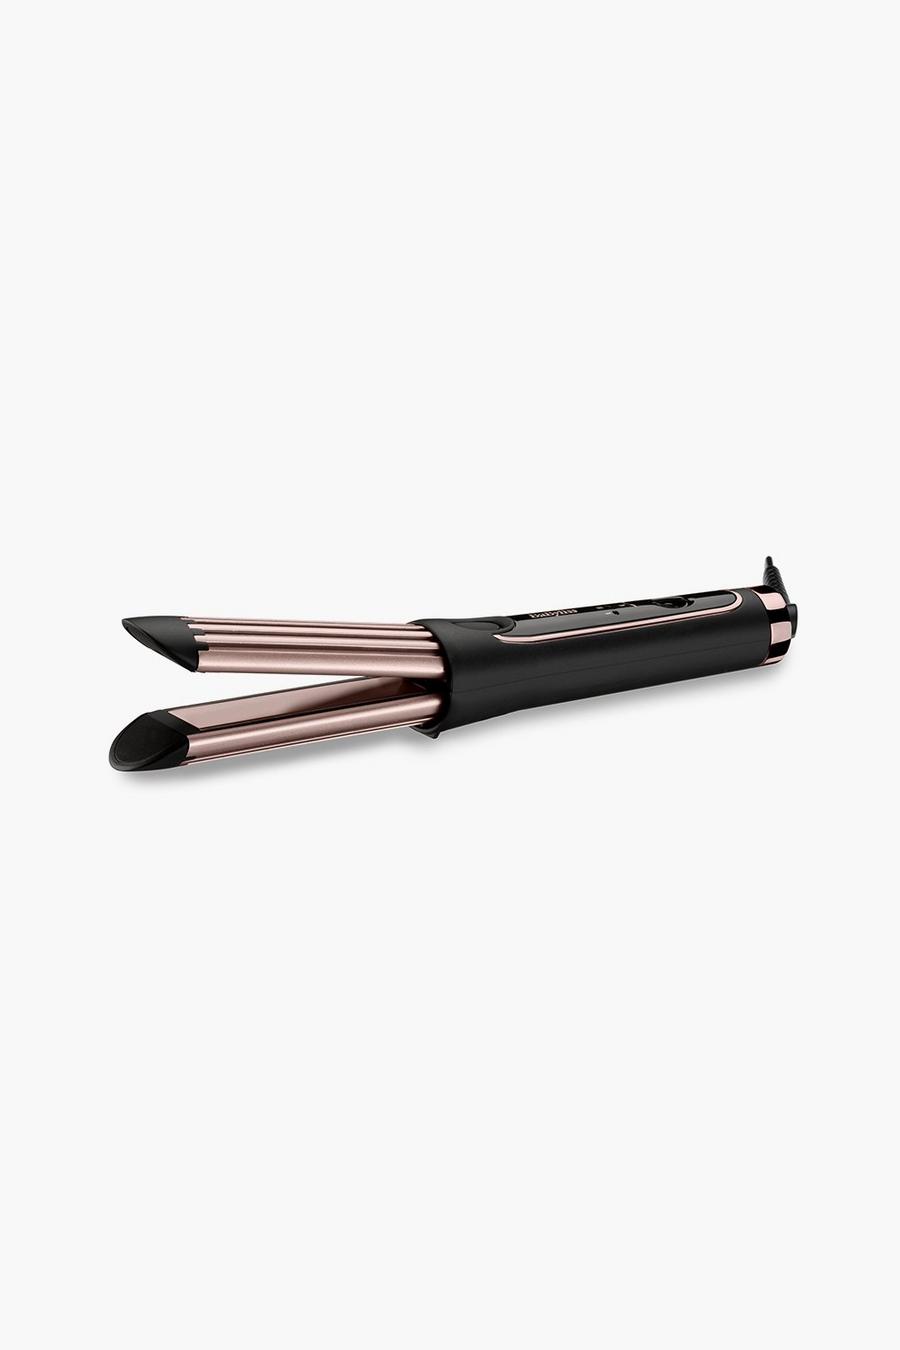 Babyliss - Luxe - Fer à boucler, Or rose metallic